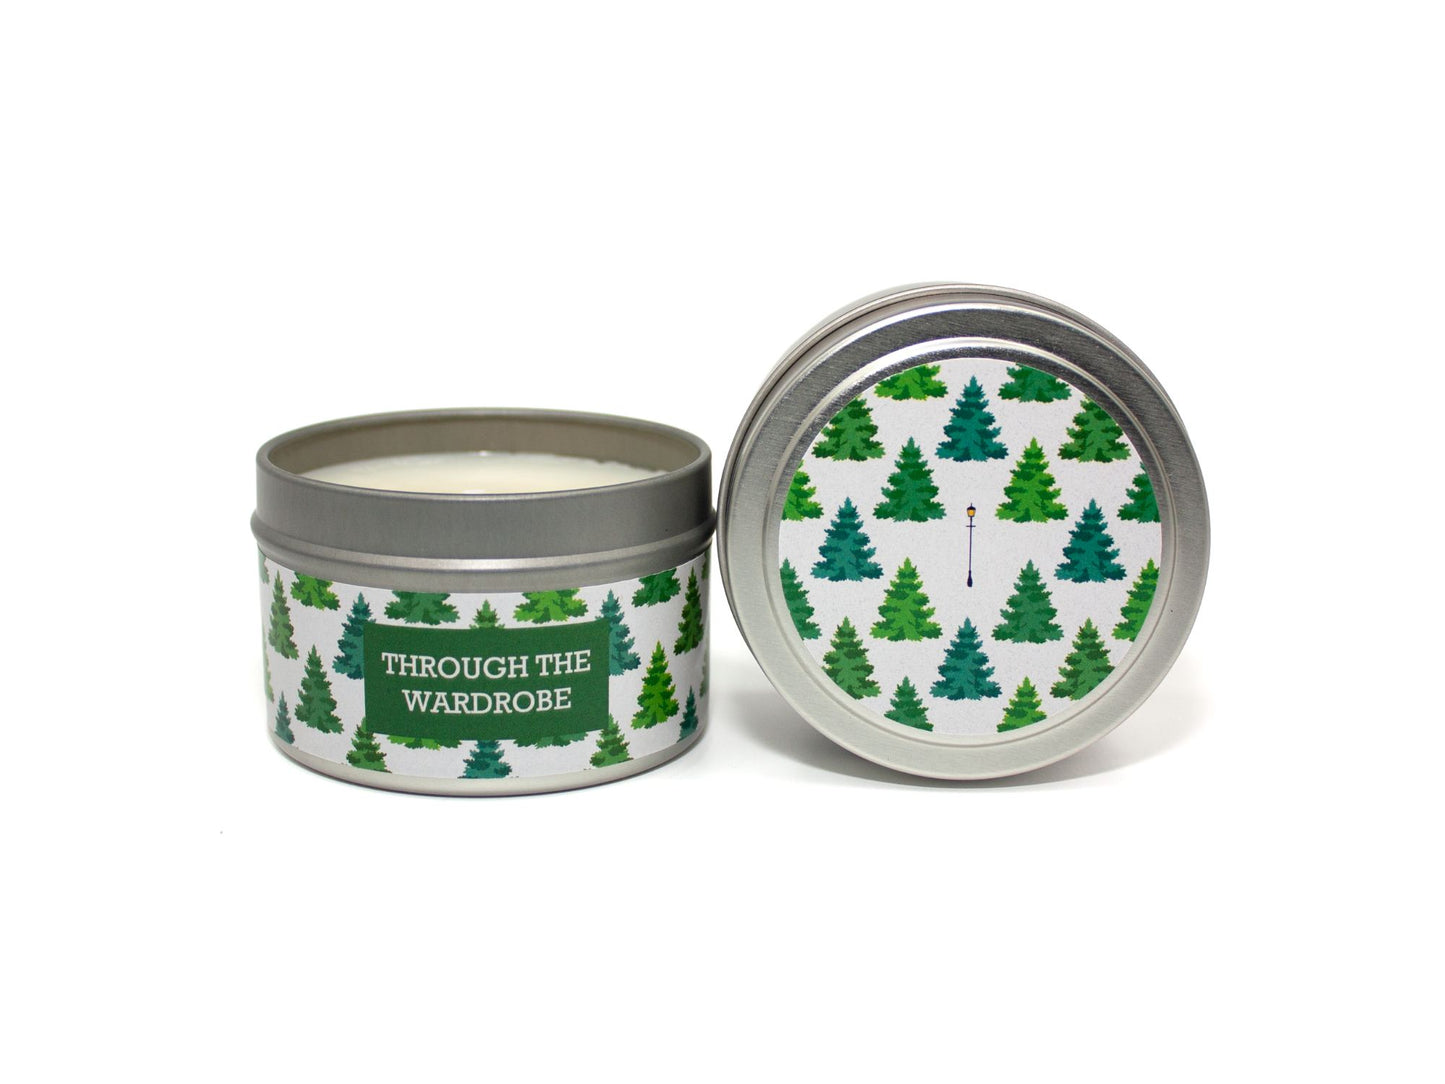 Onset & Rime balsam scented candle called "Through the Wardrobe" in a 4 oz silver tin. The circular label on top has a snow-white background with a pattern of green fir trees and a single light post. The text on the front label is "Through the Wardrobe - Balsam Fir, Cedar Boards, Swirling Snow".